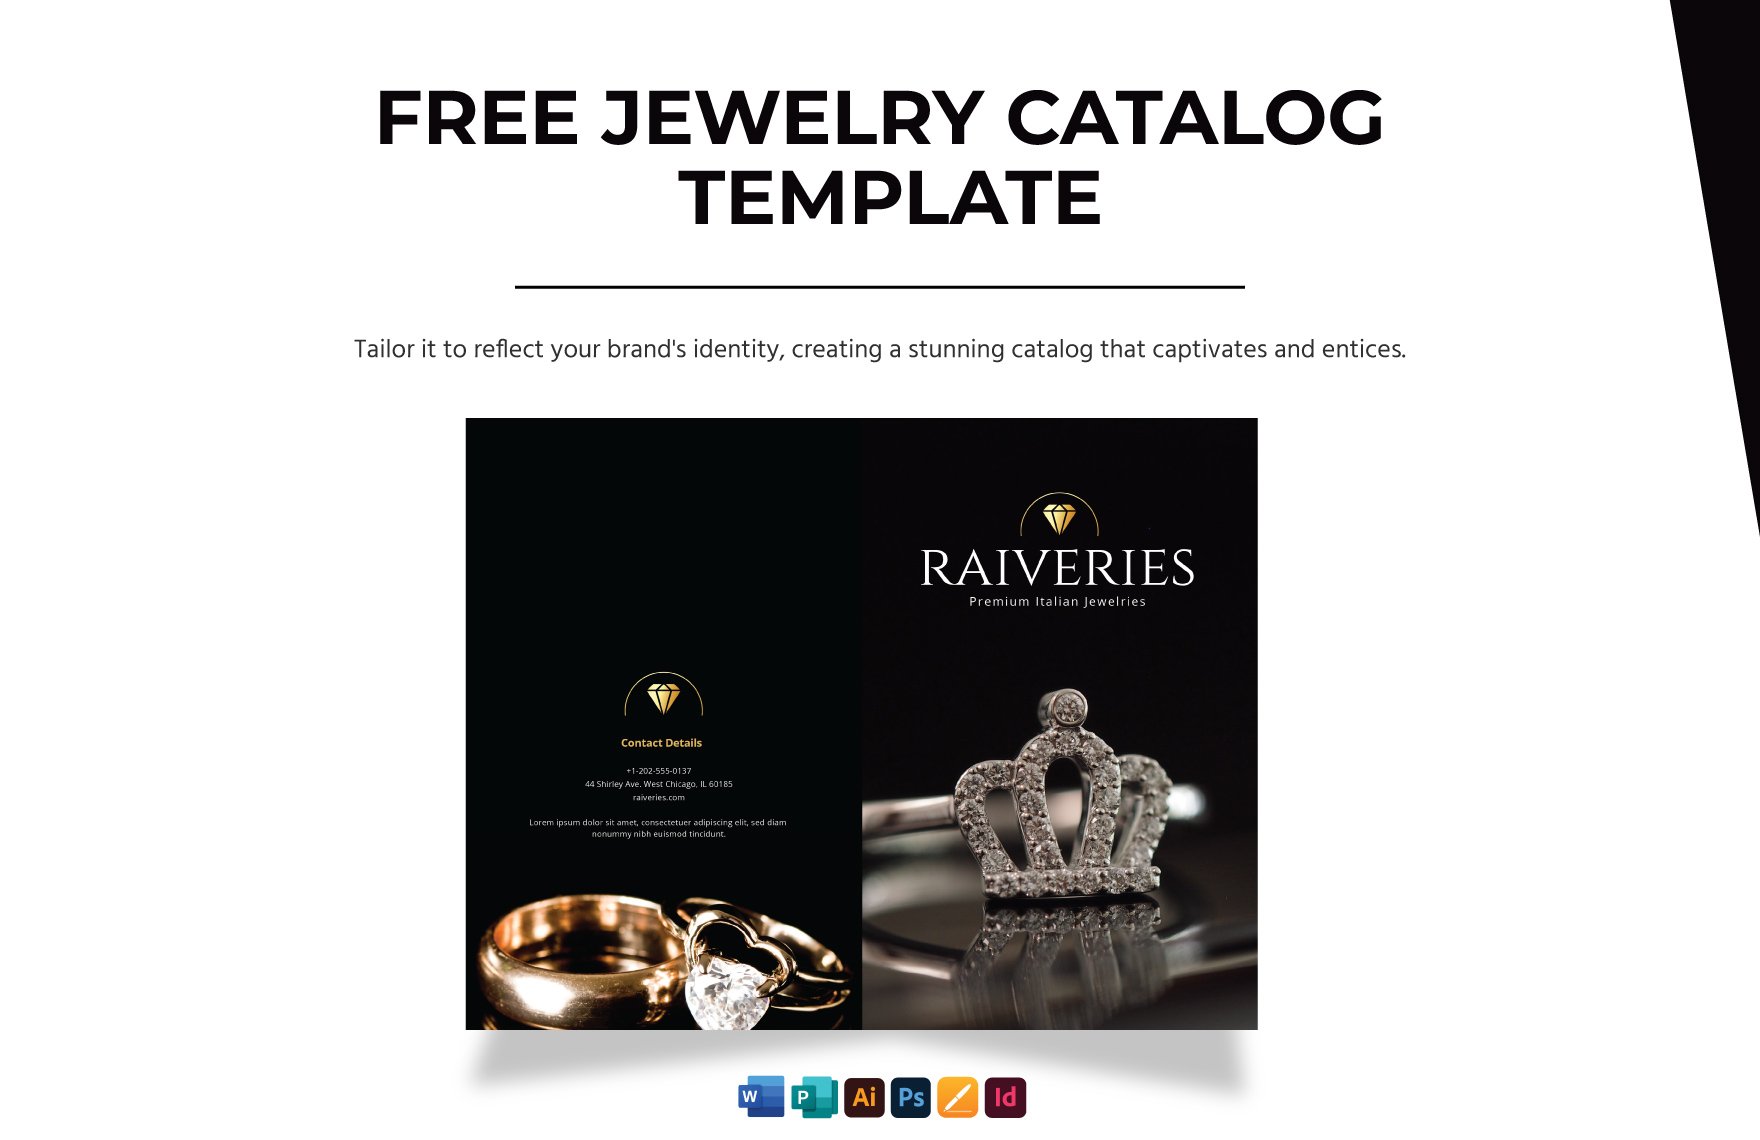 Free Jewelry Catalog Template in Word, Google Docs, Illustrator, PSD, Apple Pages, Publisher, InDesign